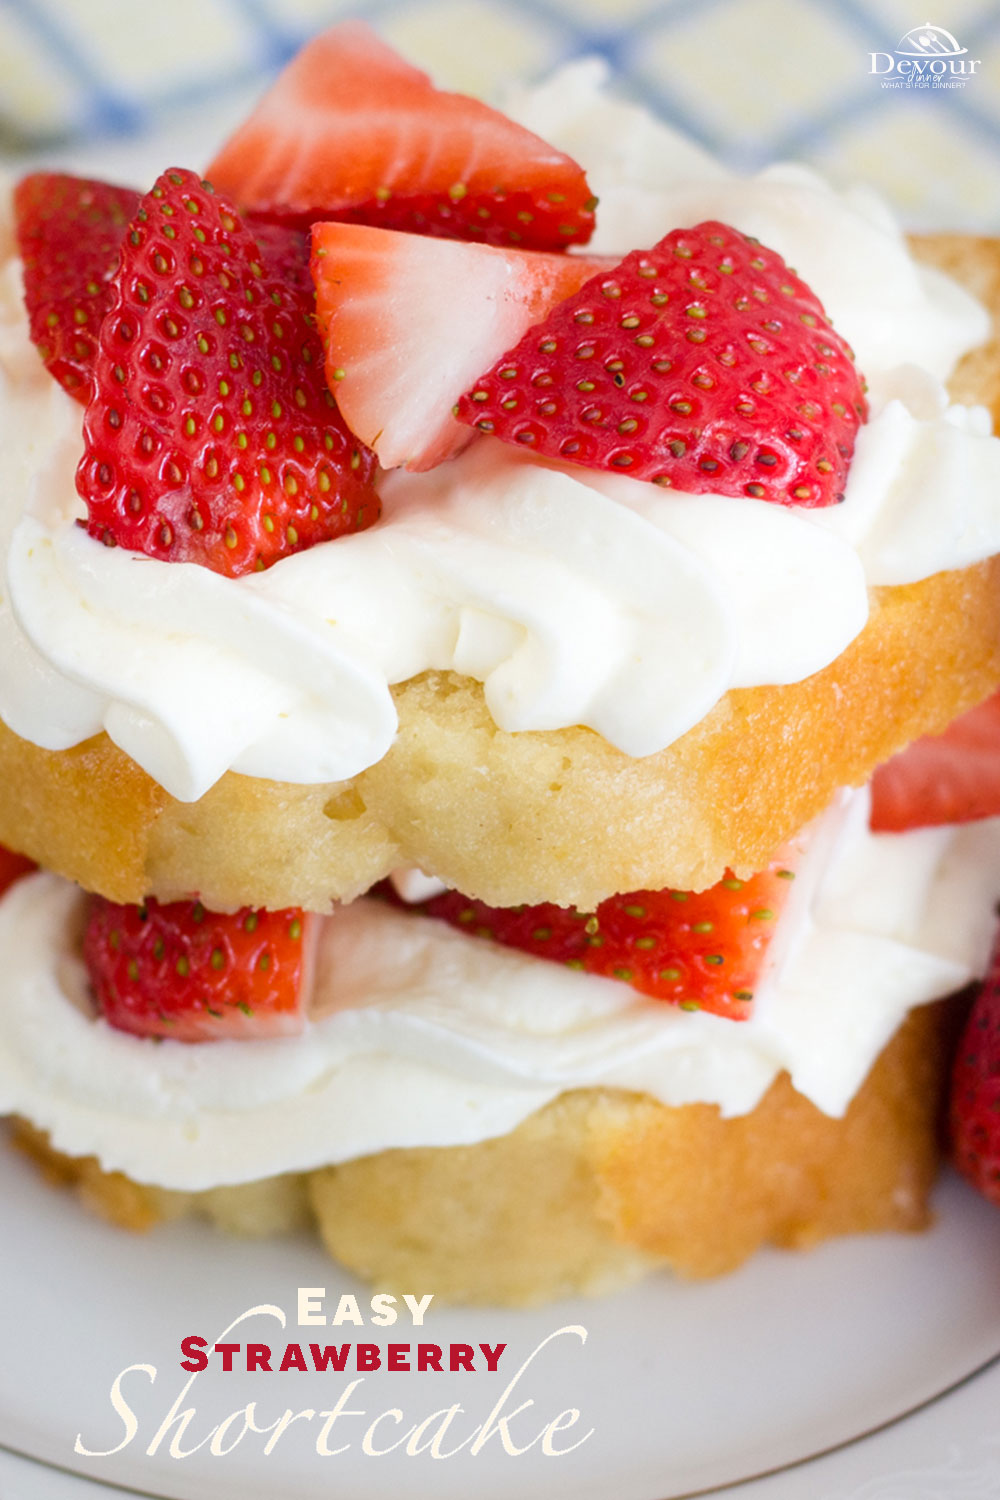 Making Easy Strawberry Shortcake is a dream come true. This simple dessert uses only a few ingredients and is the perfect recipe for kids to help make. There is no baking needed. Are you ready for a delicious dessert? #devourdinner #devourpower #strawberryshortcake #easystrawberryshortcake #easydessert #nobakedessert #nobakerecipe #bonappetitmag #thekitchn #recipeoftheday #americastestkitchen #buzzfeedfood #cooksillustrated #foodgawker #bareaders #foodblogfeed #droolclub